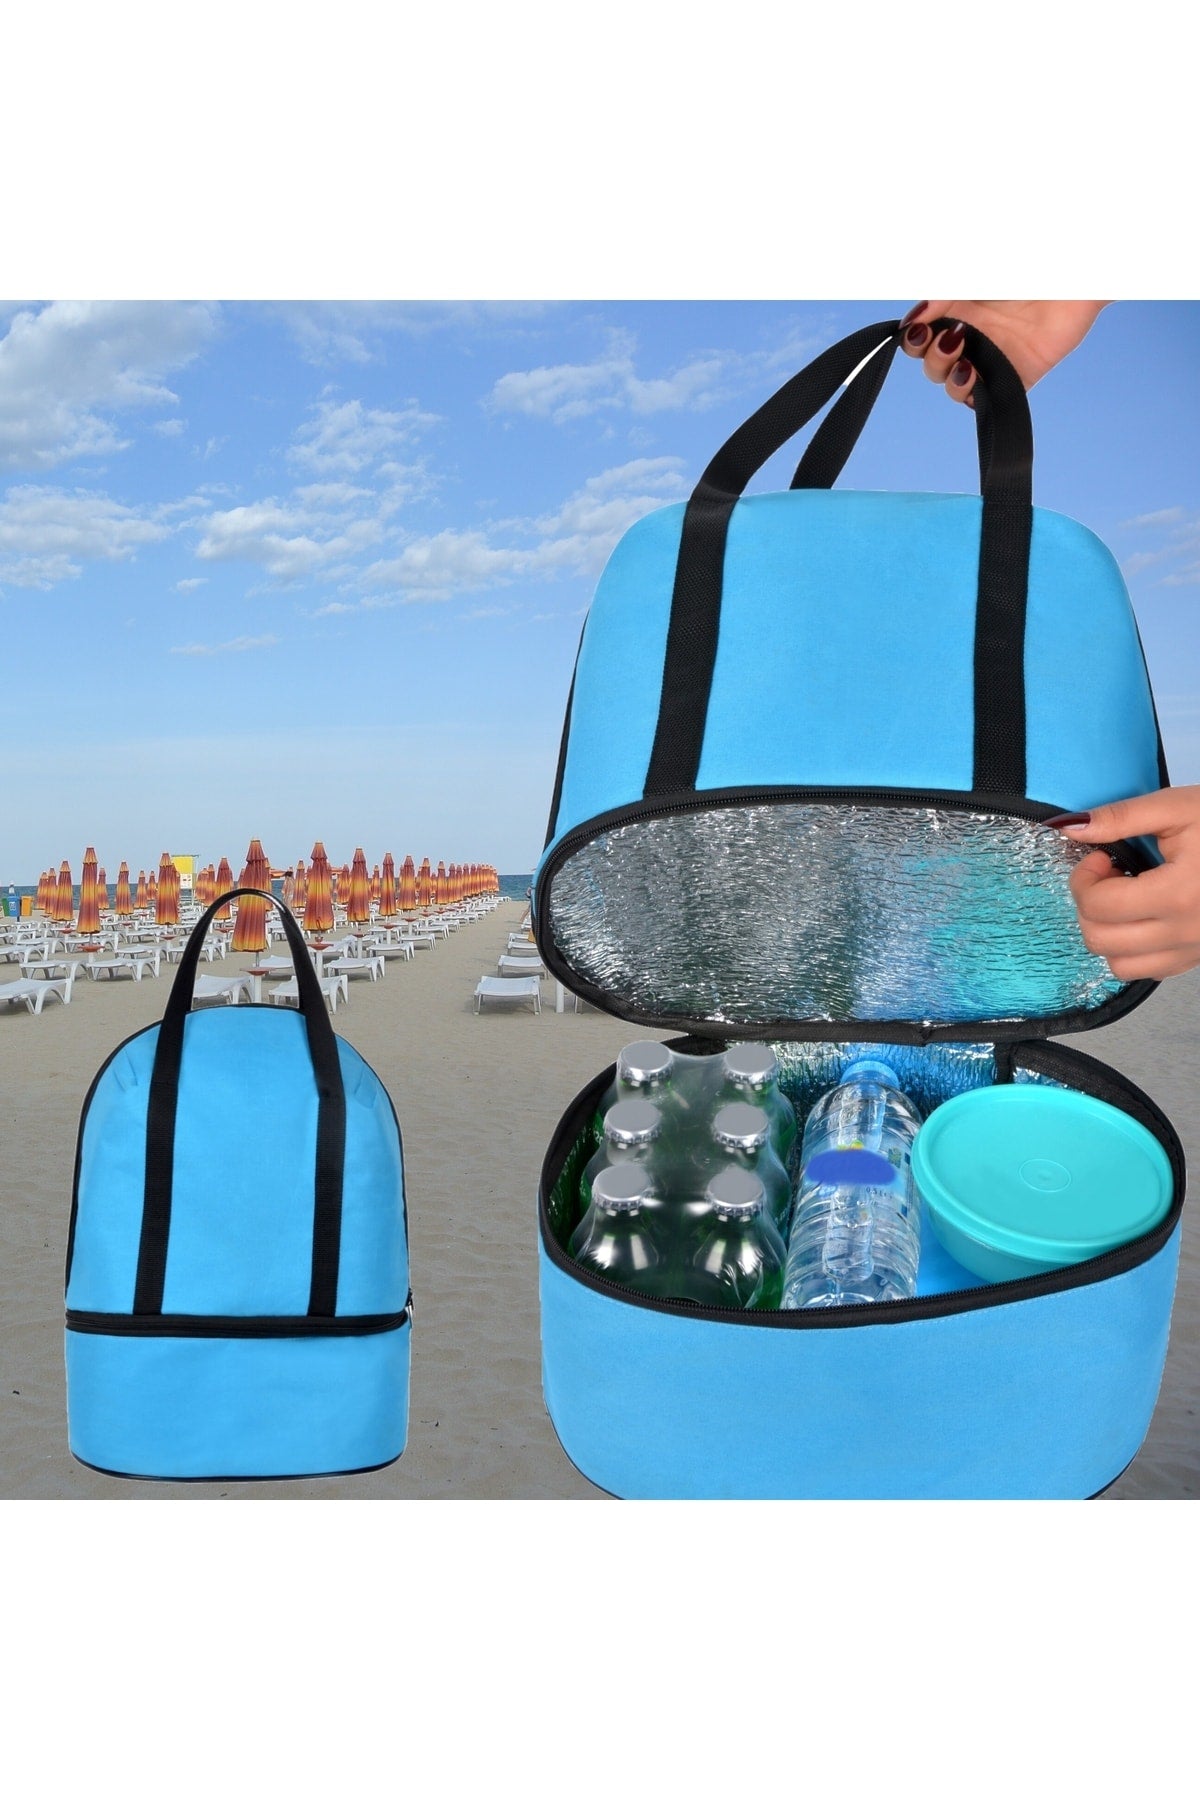 Thermos Bag Cooler Camping Bag Beverage Carry Bag For Picnic Camping Outdoor 26 Lt.